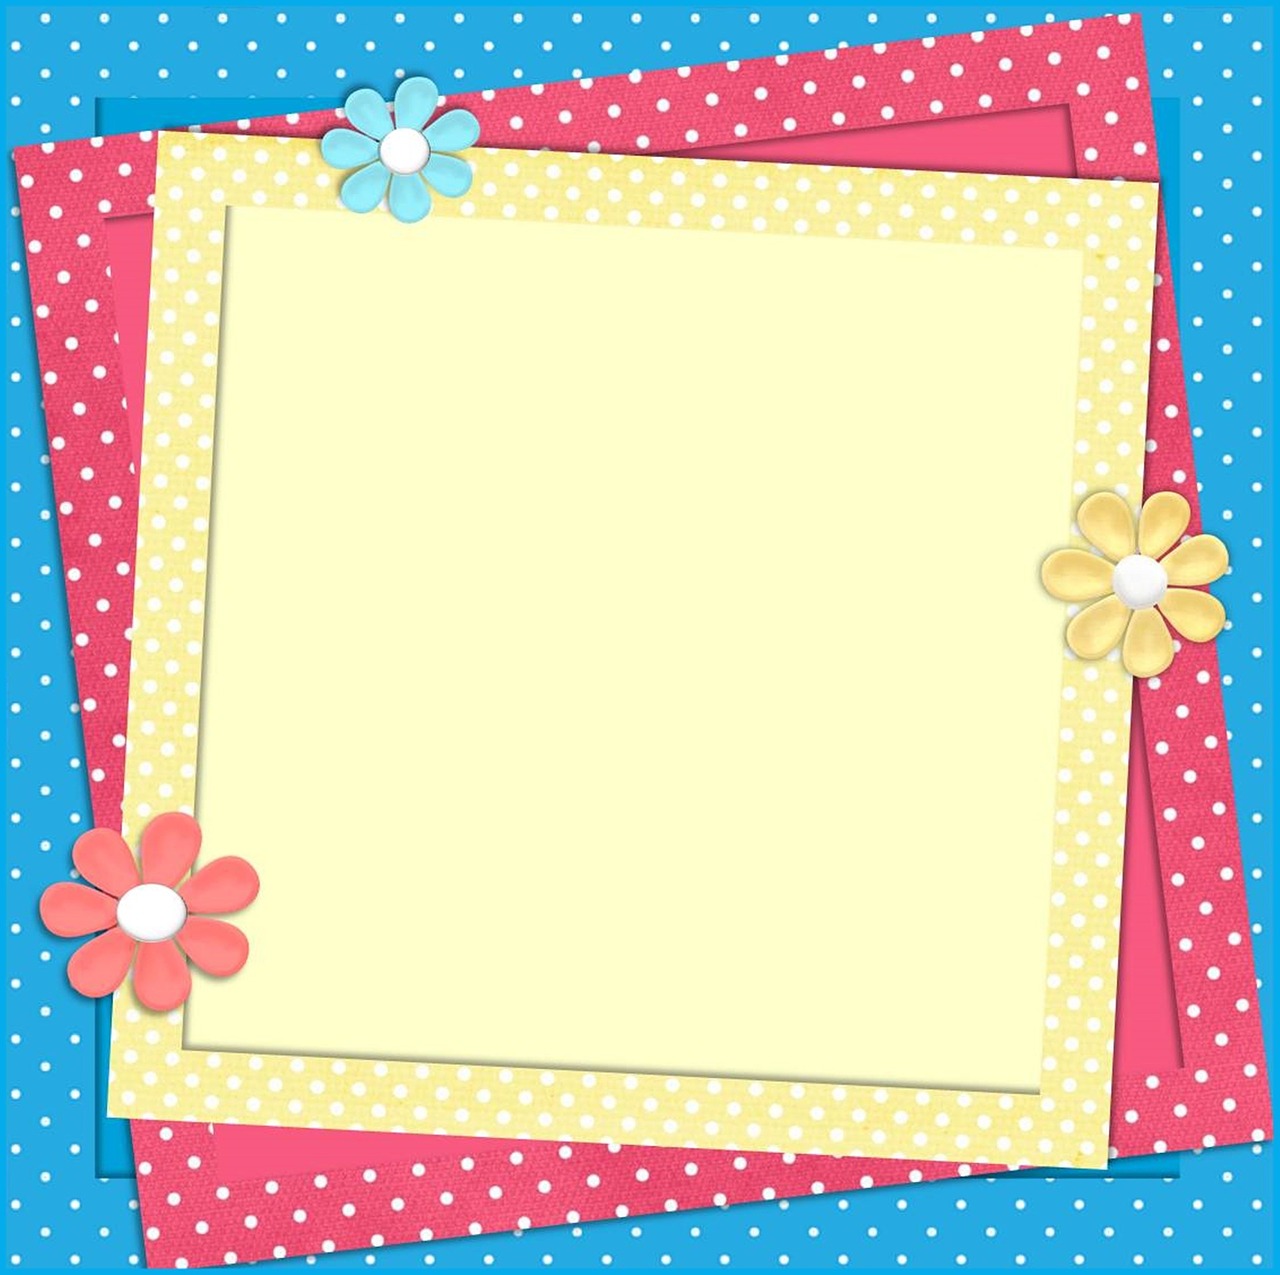 guestbook sweet colorful free photo